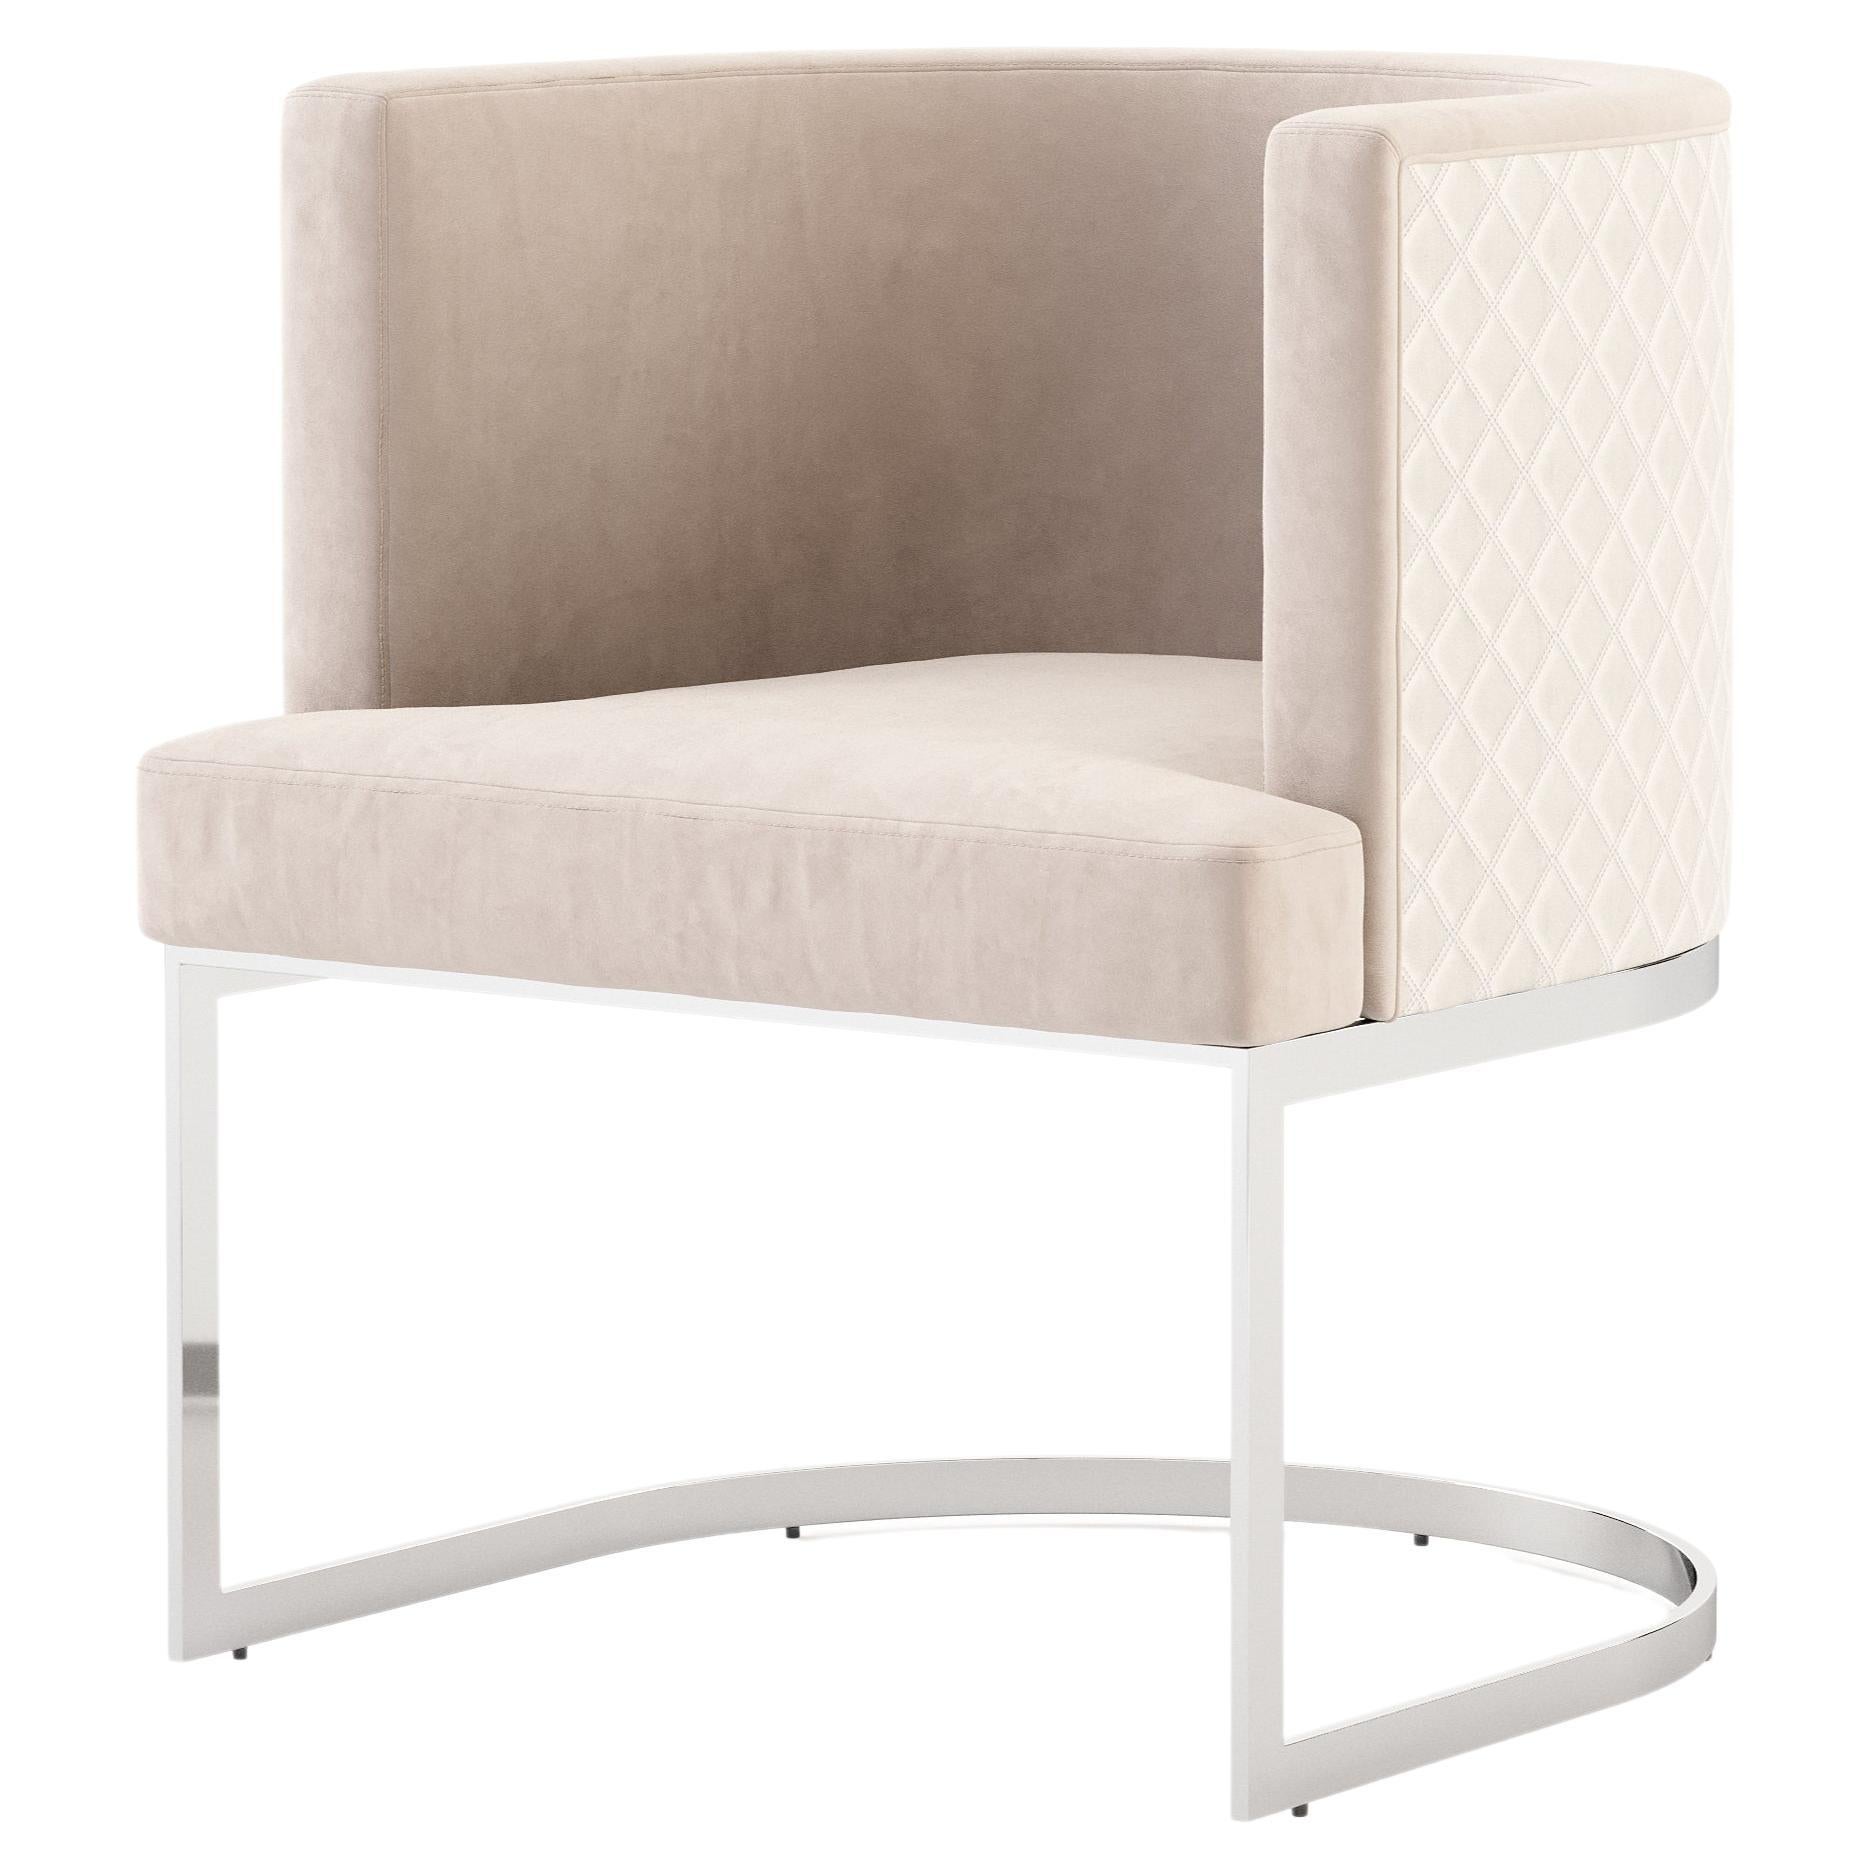 Modern Club Chair Made with Stainless Steel, Velvet and Leather by Stylish Club